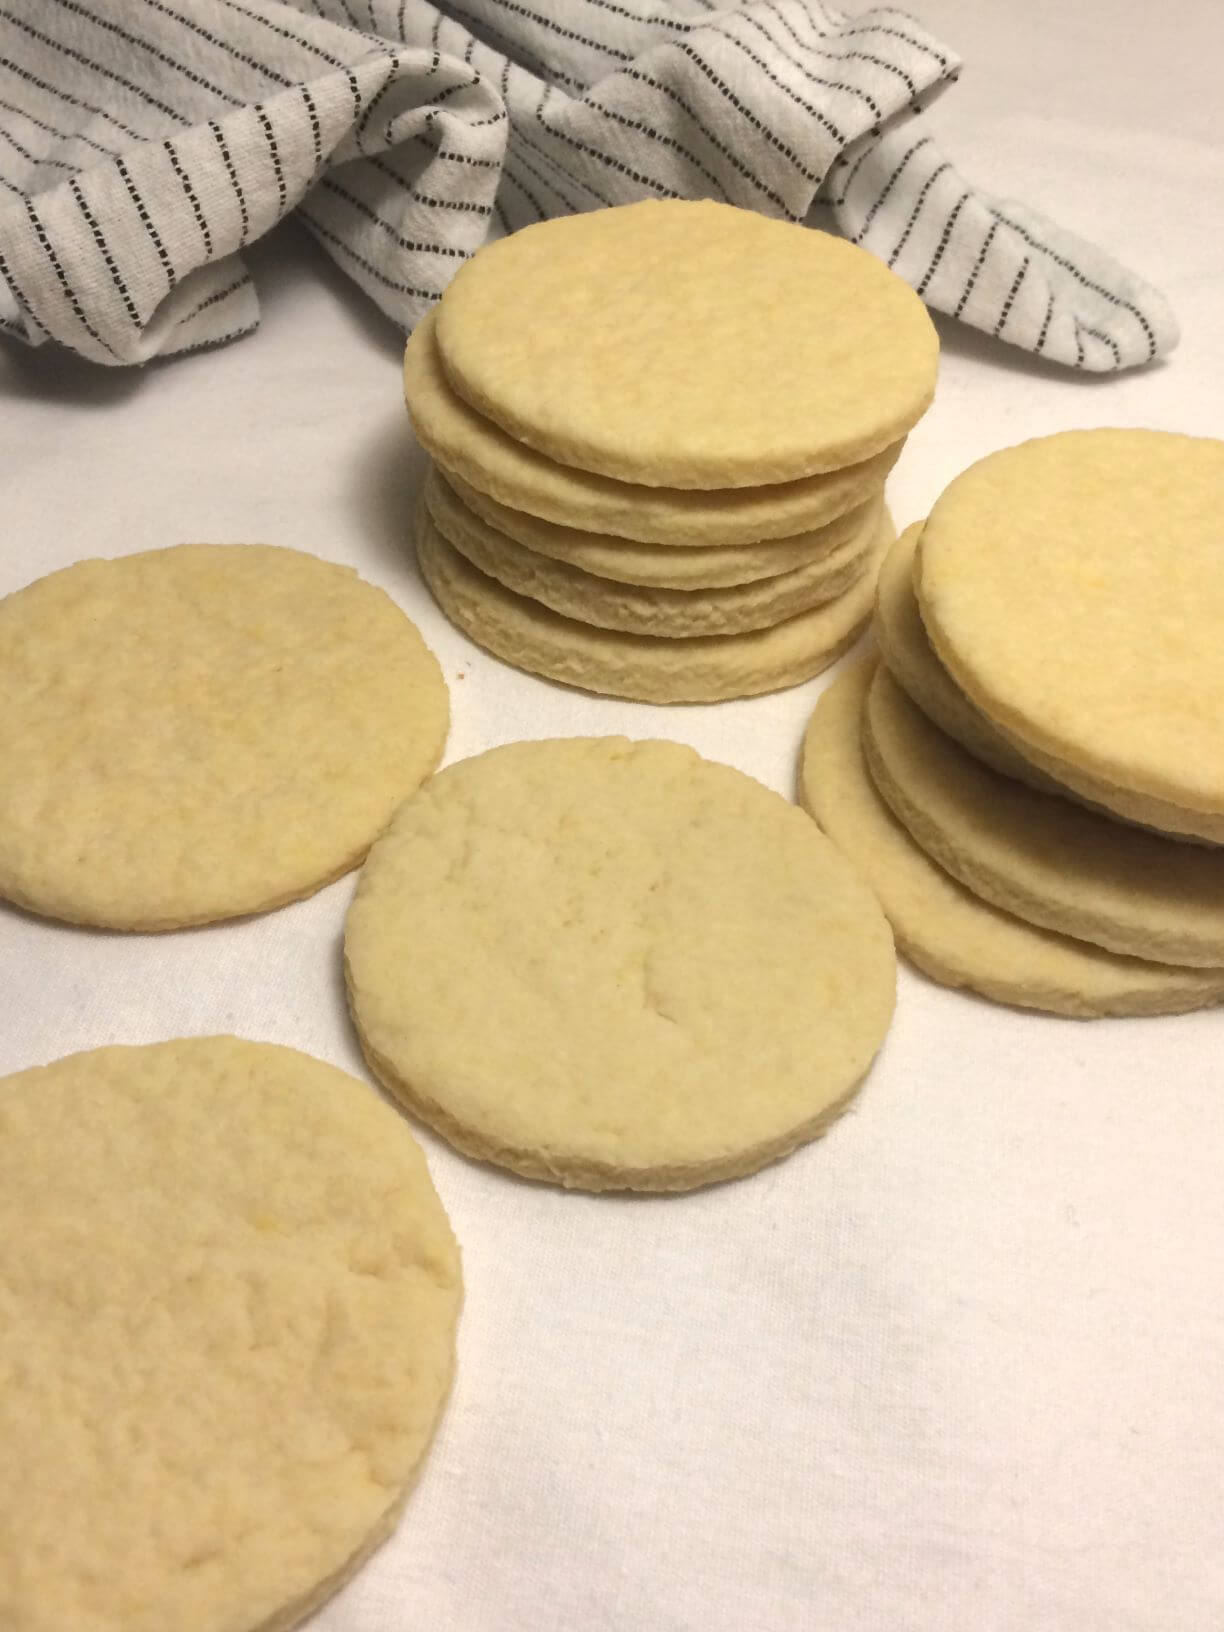 baked cut out sugar cookies with 2 stacks and 3 single cookies in the front with a white towel with black strips in the back